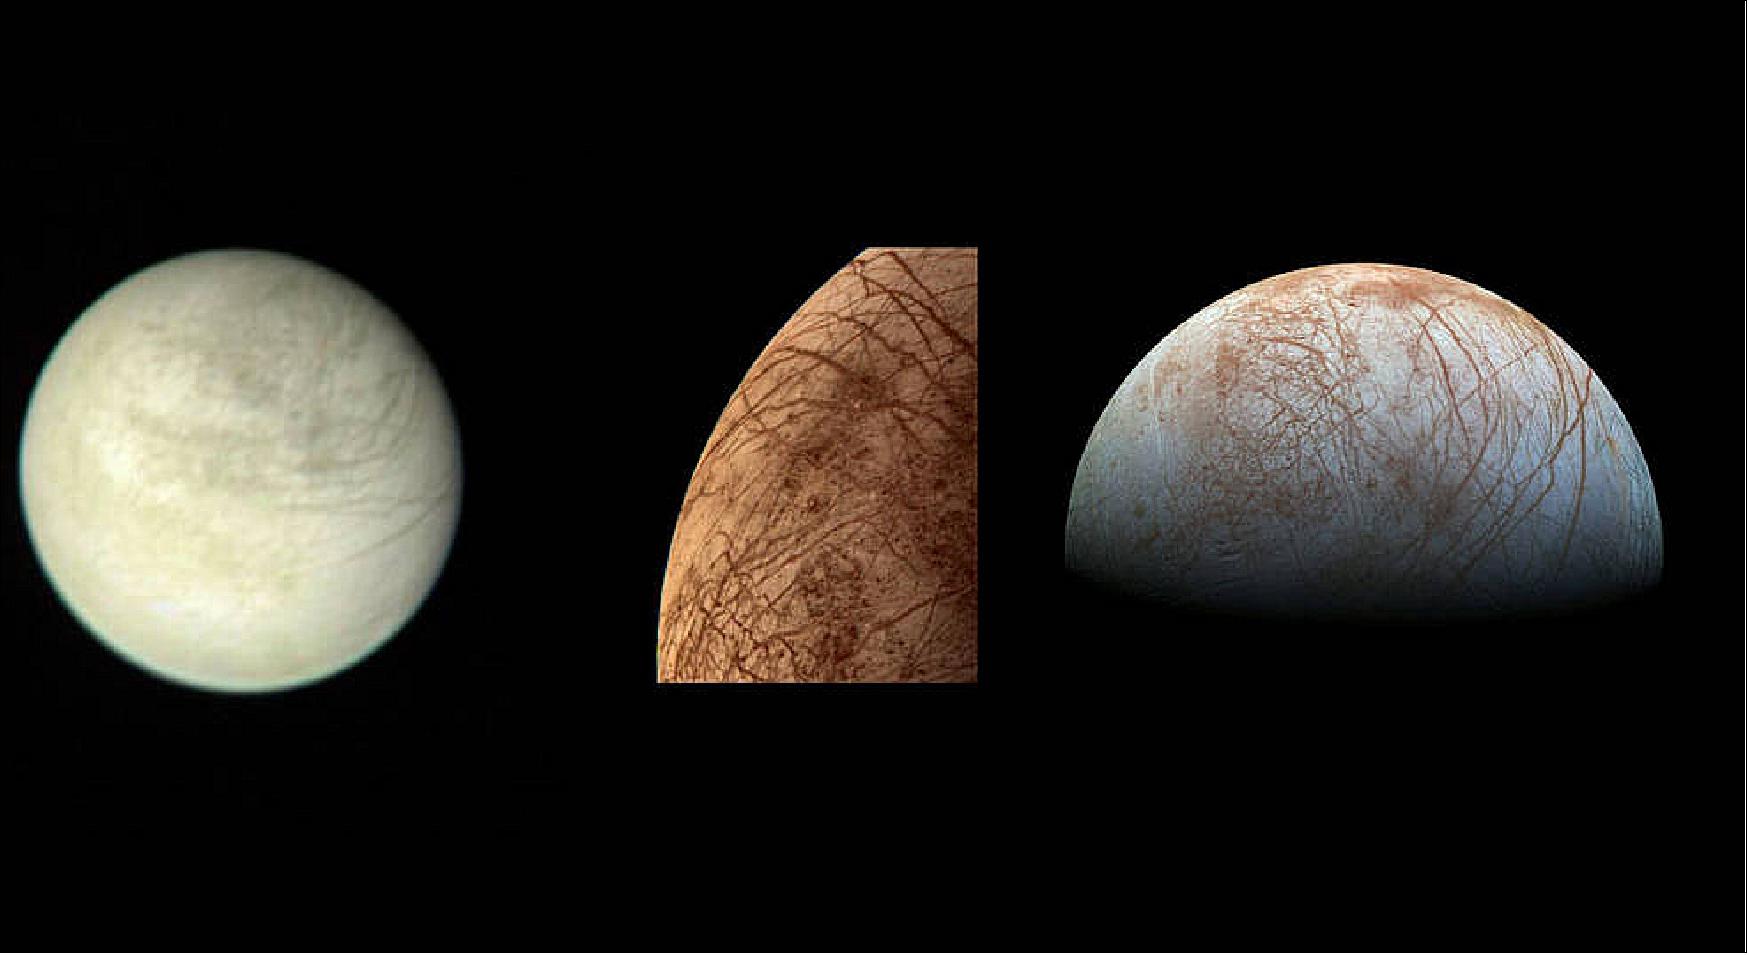 Figure 2: Left: A view of Europa taken from 2.9 million km away on March 2, 1979 by the Voyager 1 spacecraft. Center: A color image of Europa taken by the Voyager 2 spacecraft during its close encounter on July 9, 1979. Right: A view of Europa made from images taken by the Galileo spacecraft in the late 1990s (image credit: NASA/JPL)